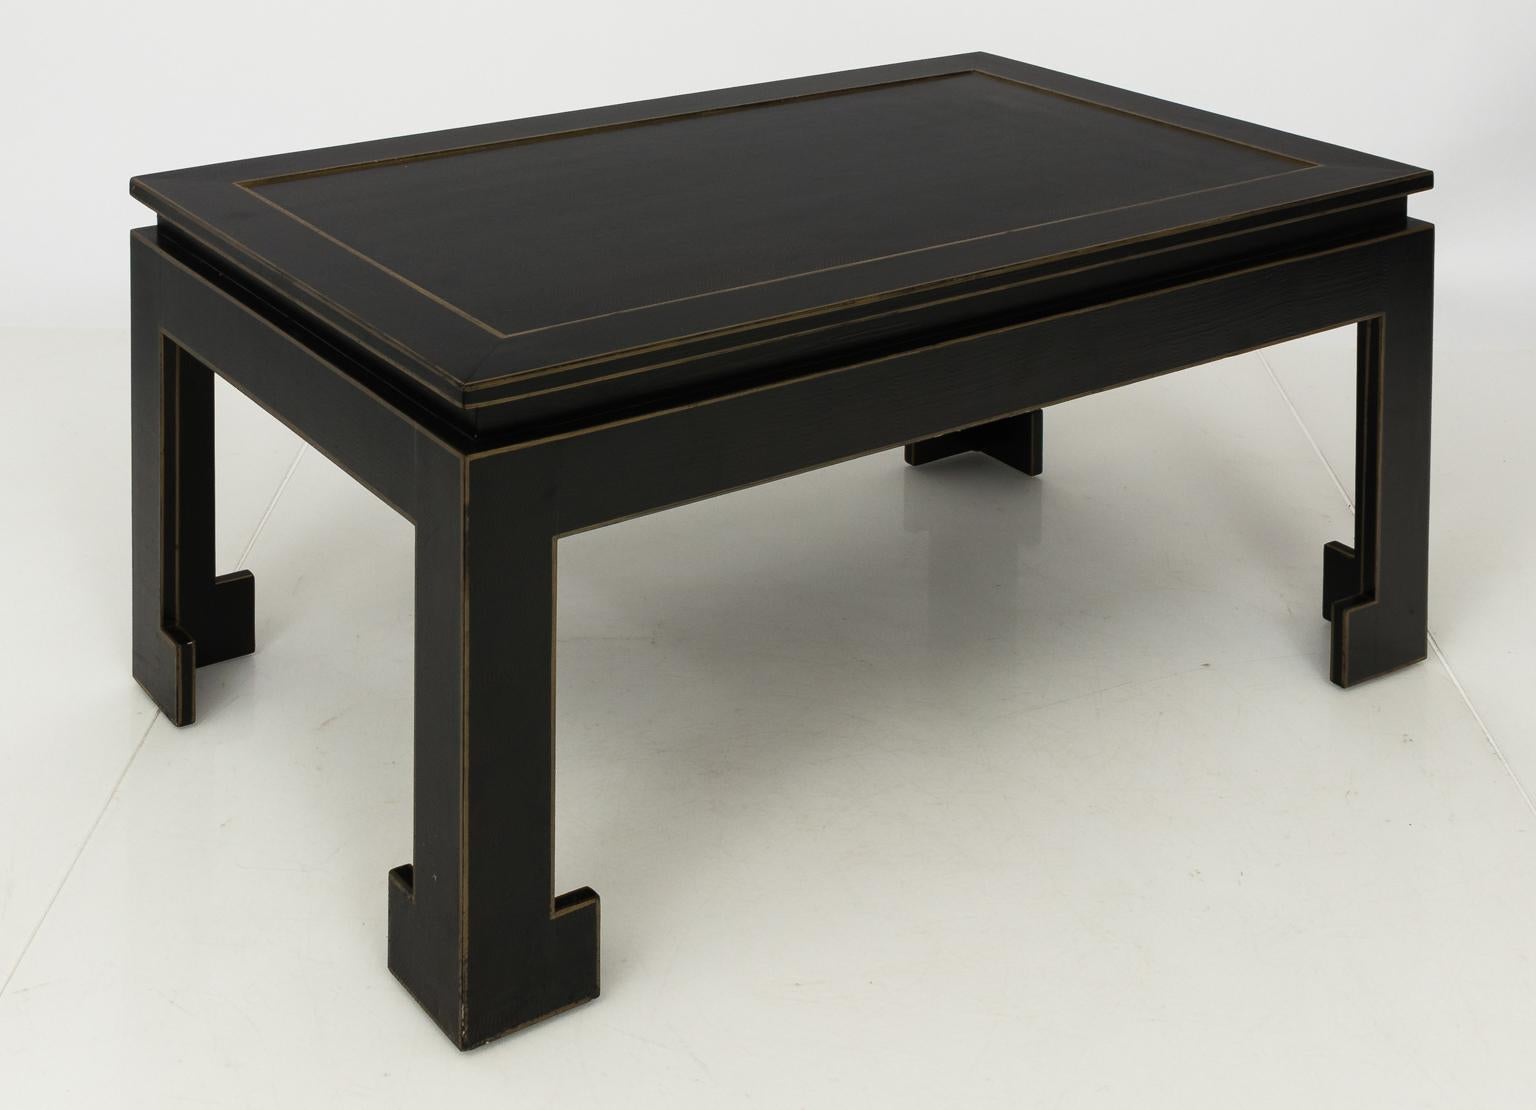 Contemporary black lacquered Chinese coffee table with gold painted trim and bracket legs.
 